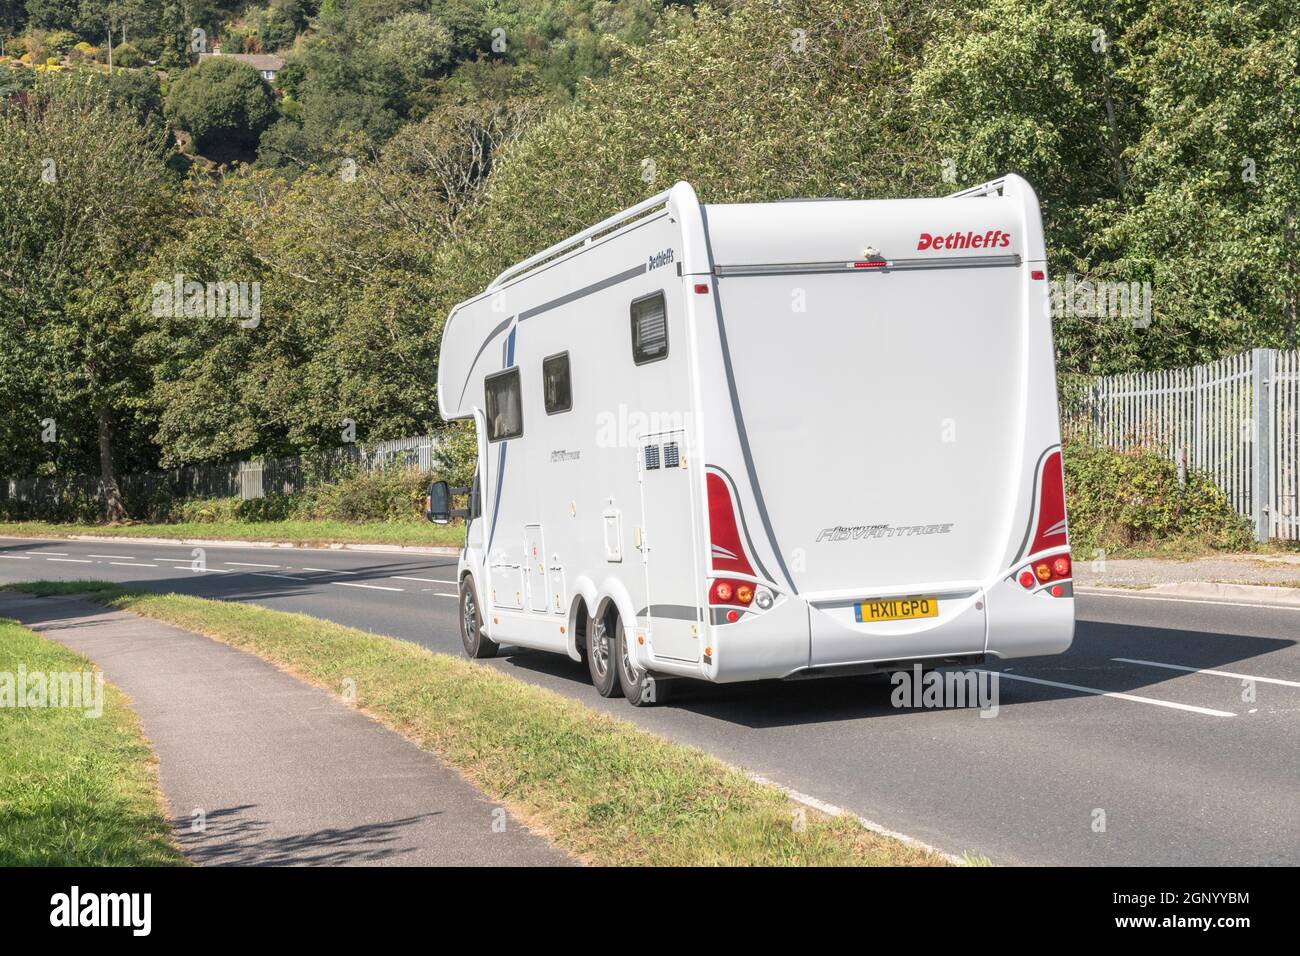 Arist Dethleffs motorhome travelling downhill on country road in Cornwall. For UK motorhomes, campervans, staycations in UK, alternative holidays. Stock Photo